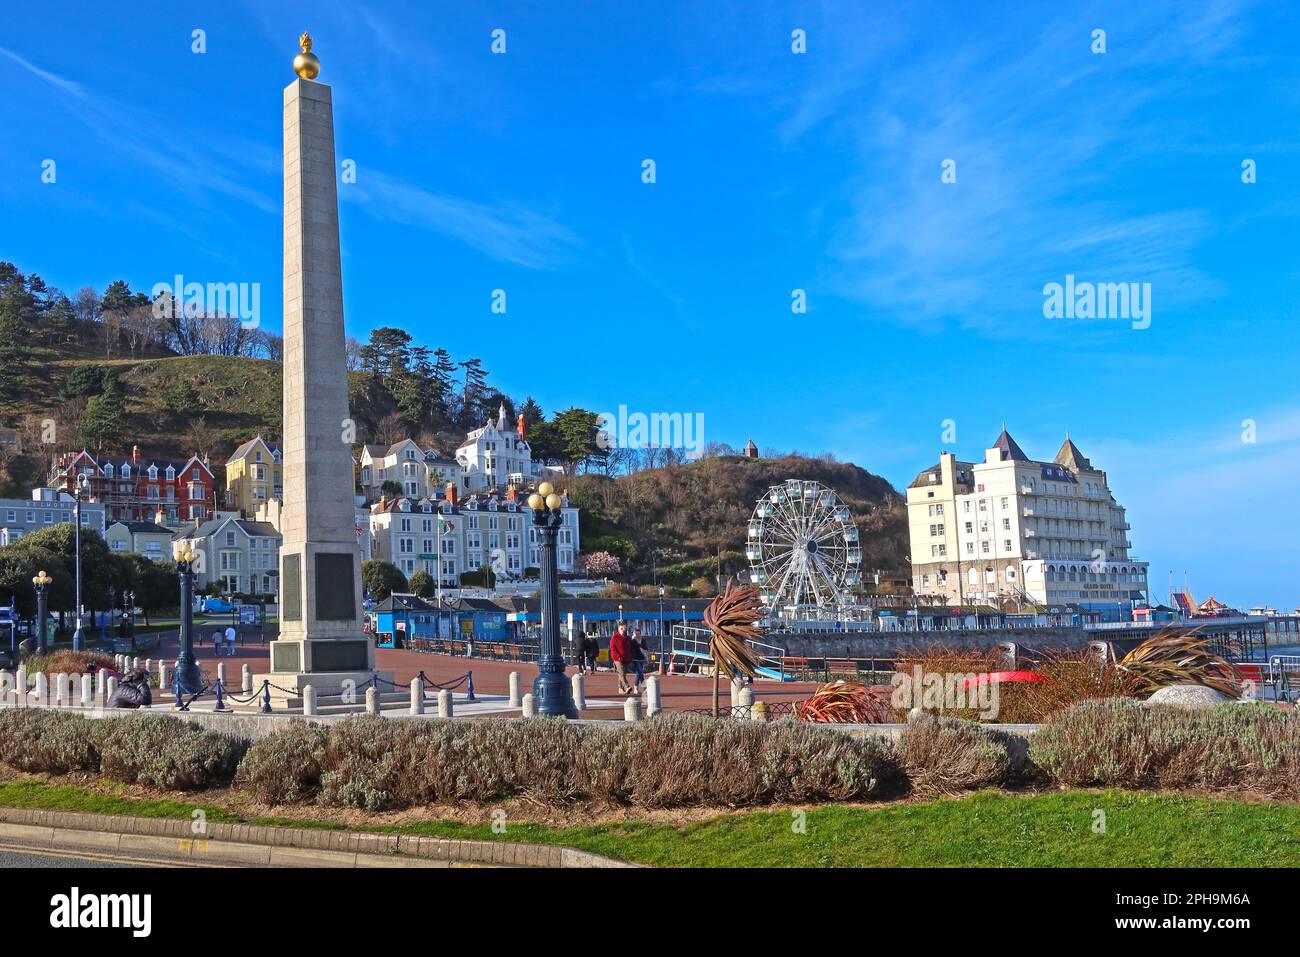 The Great Orme, Cenotaph topped with golden urn, Ferris wheel, pier and Grand Hotel, in beautiful Llandudno town, Conwy, North Wales, UK, LL30 2LN Stock Photo